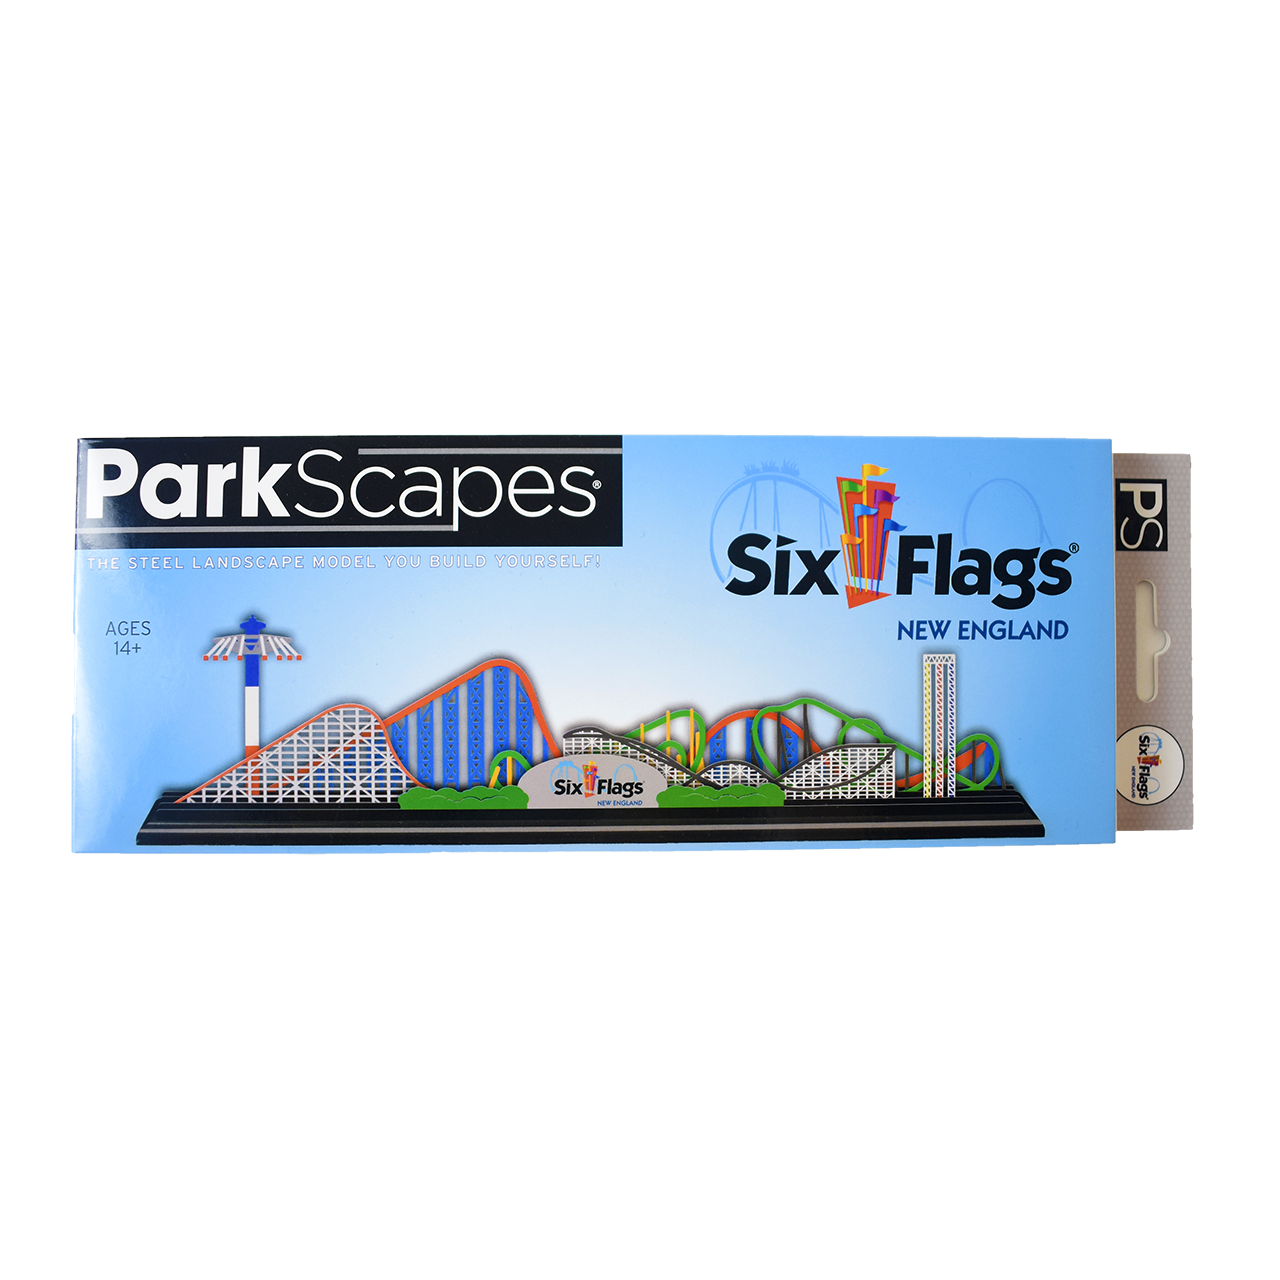 SIX FLAGS PARKSCAPES - NEW ENGLAND